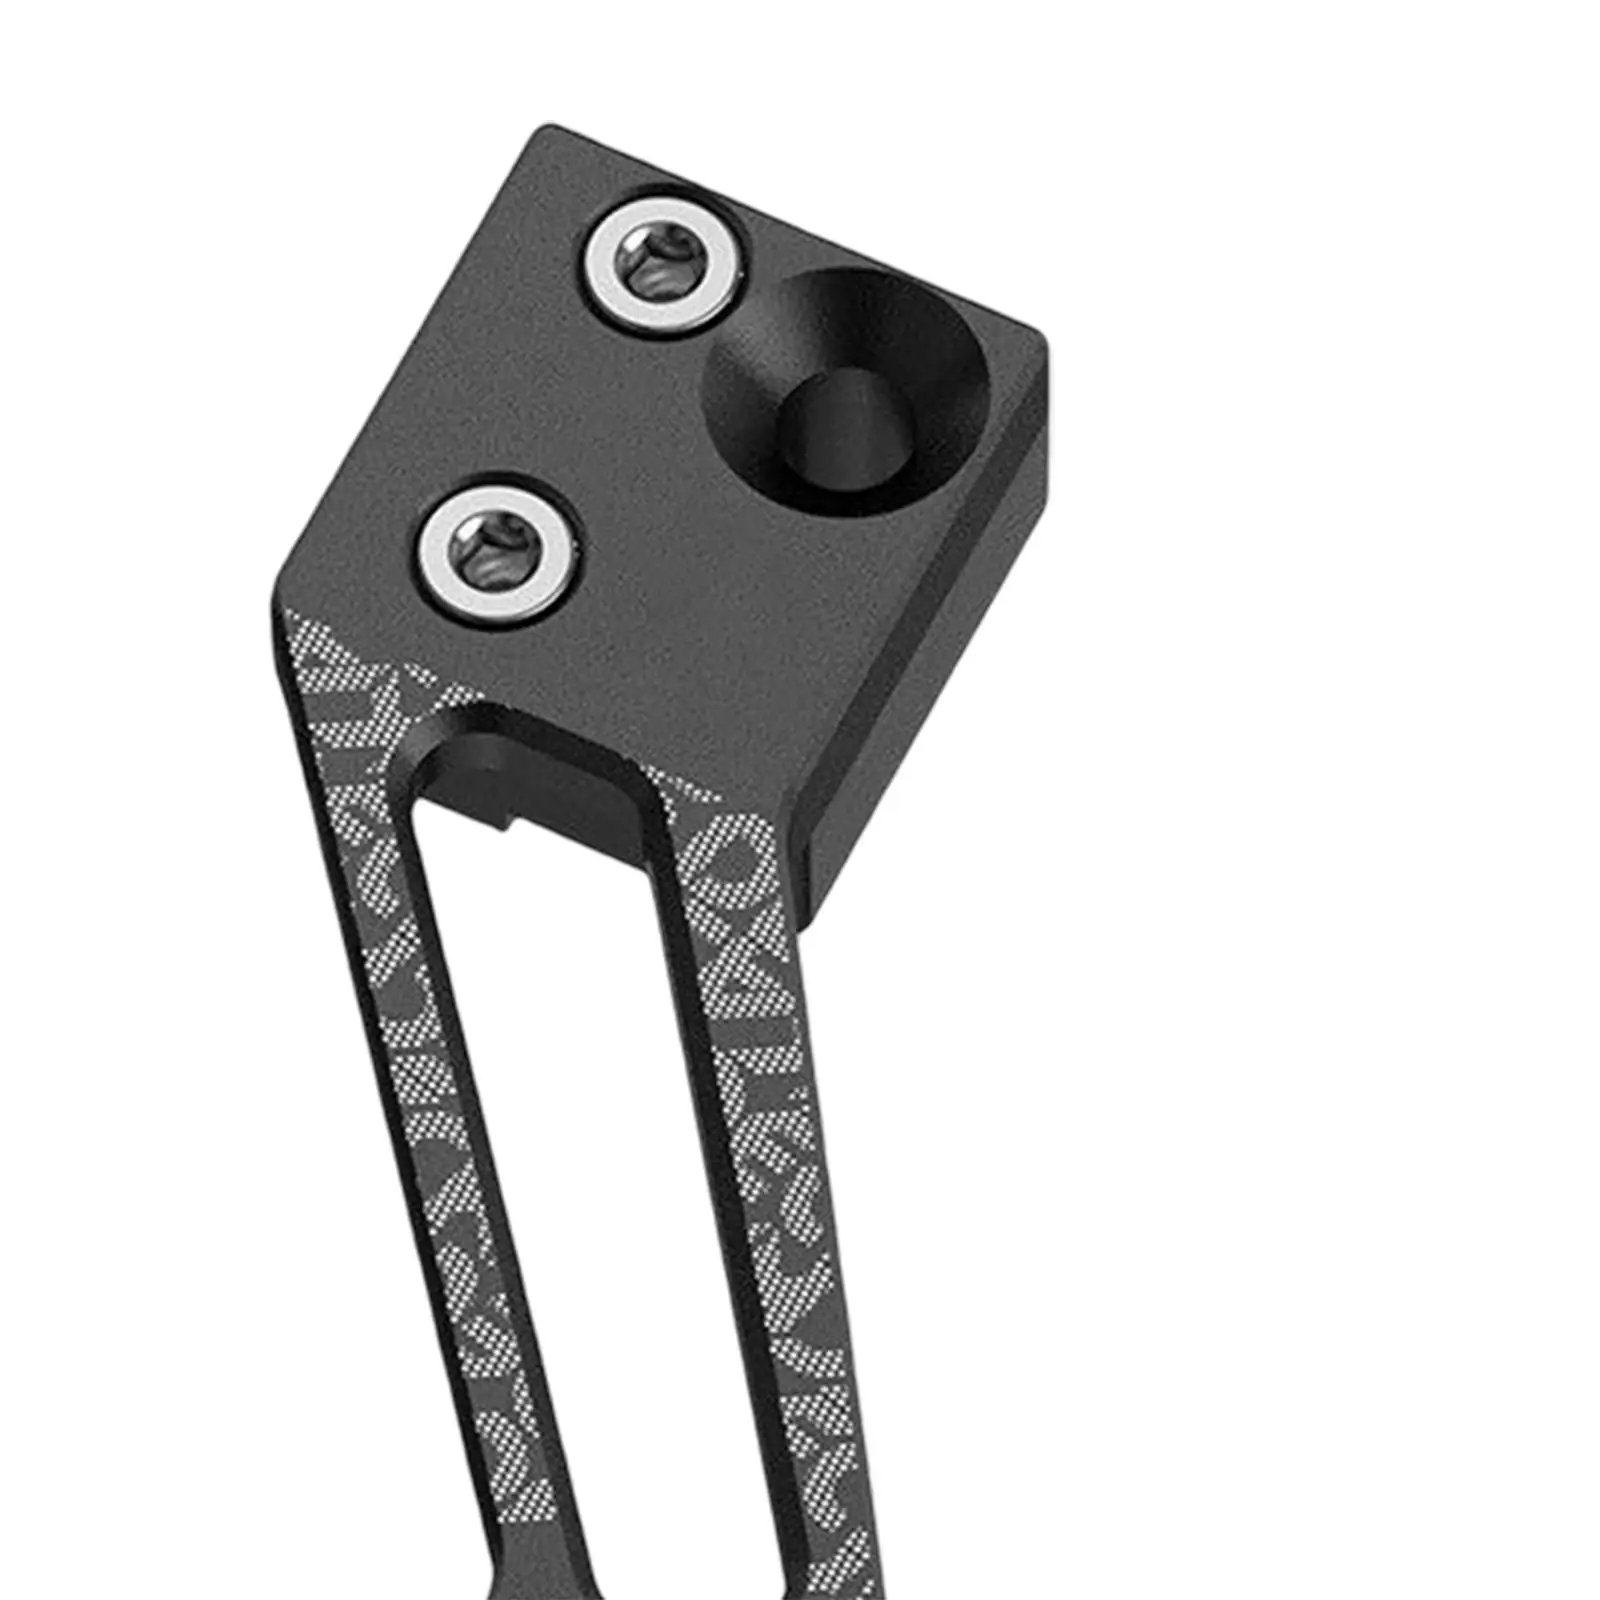 Aluminum Alloy Chain Guide D Type Clamp Mount for Mountainbike Road Bike